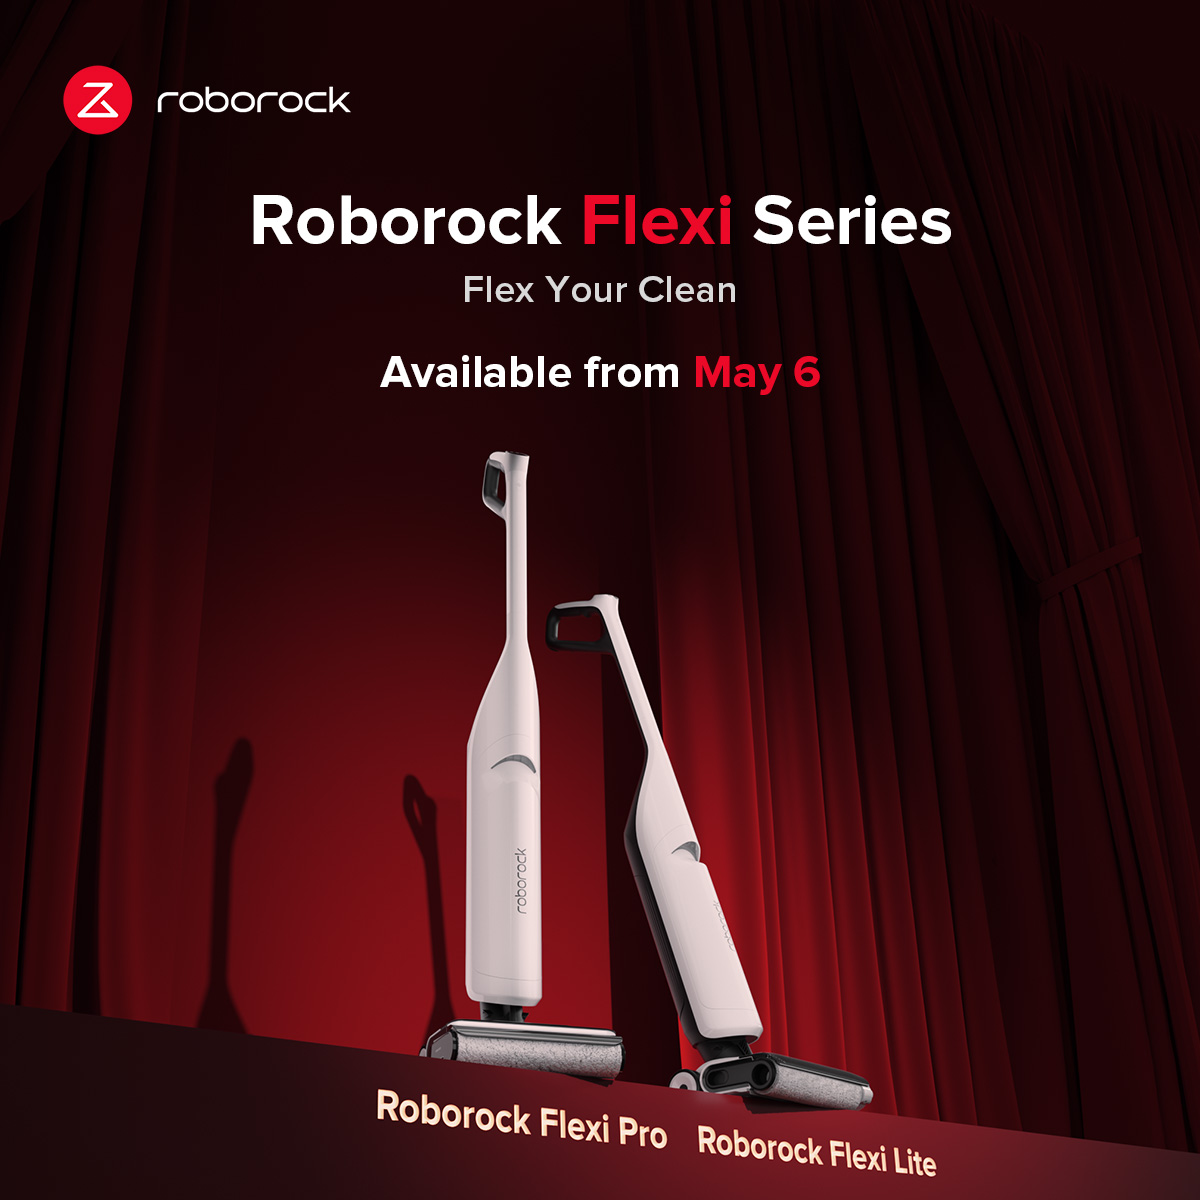 Experience the ultimate in modern cleaning technology with Roborock's Flexi Series! 💫✨ Designed for the chic and contemporary home, it's time to elevate your cleaning game. Keep an eye out for our upcoming open sale event! #FlexiSeries #Roborock #CleaningRevolution #OpenSale